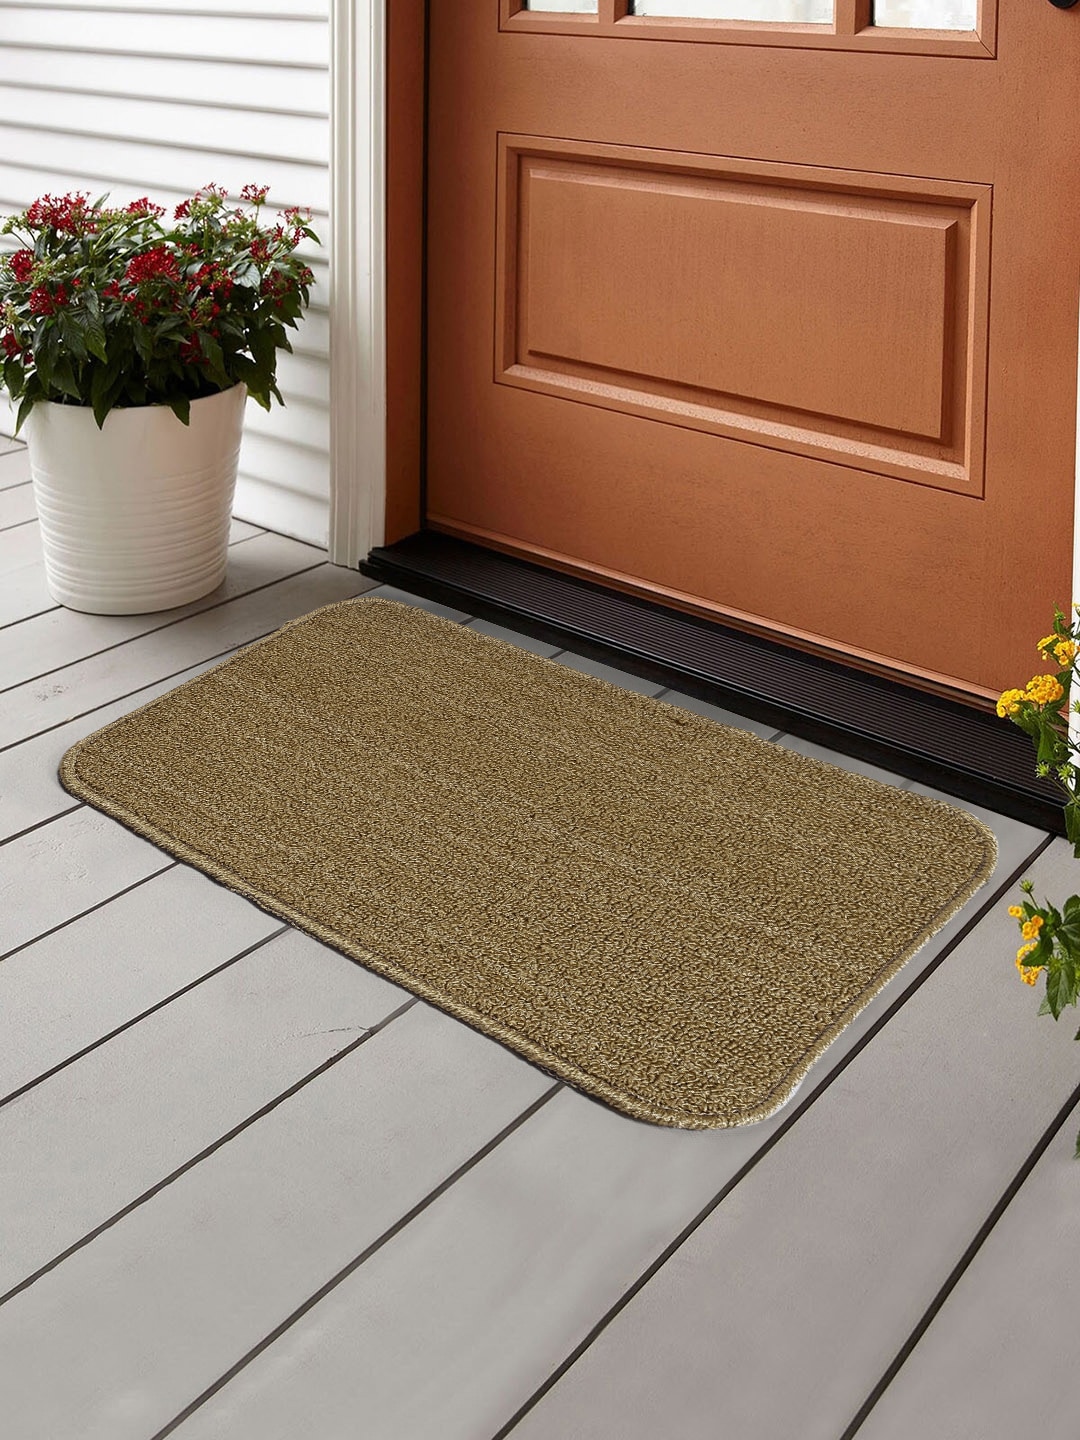 Saral Home Gold-coloured Solid Polypropylene Anti-Skid Bath Rug Price in India